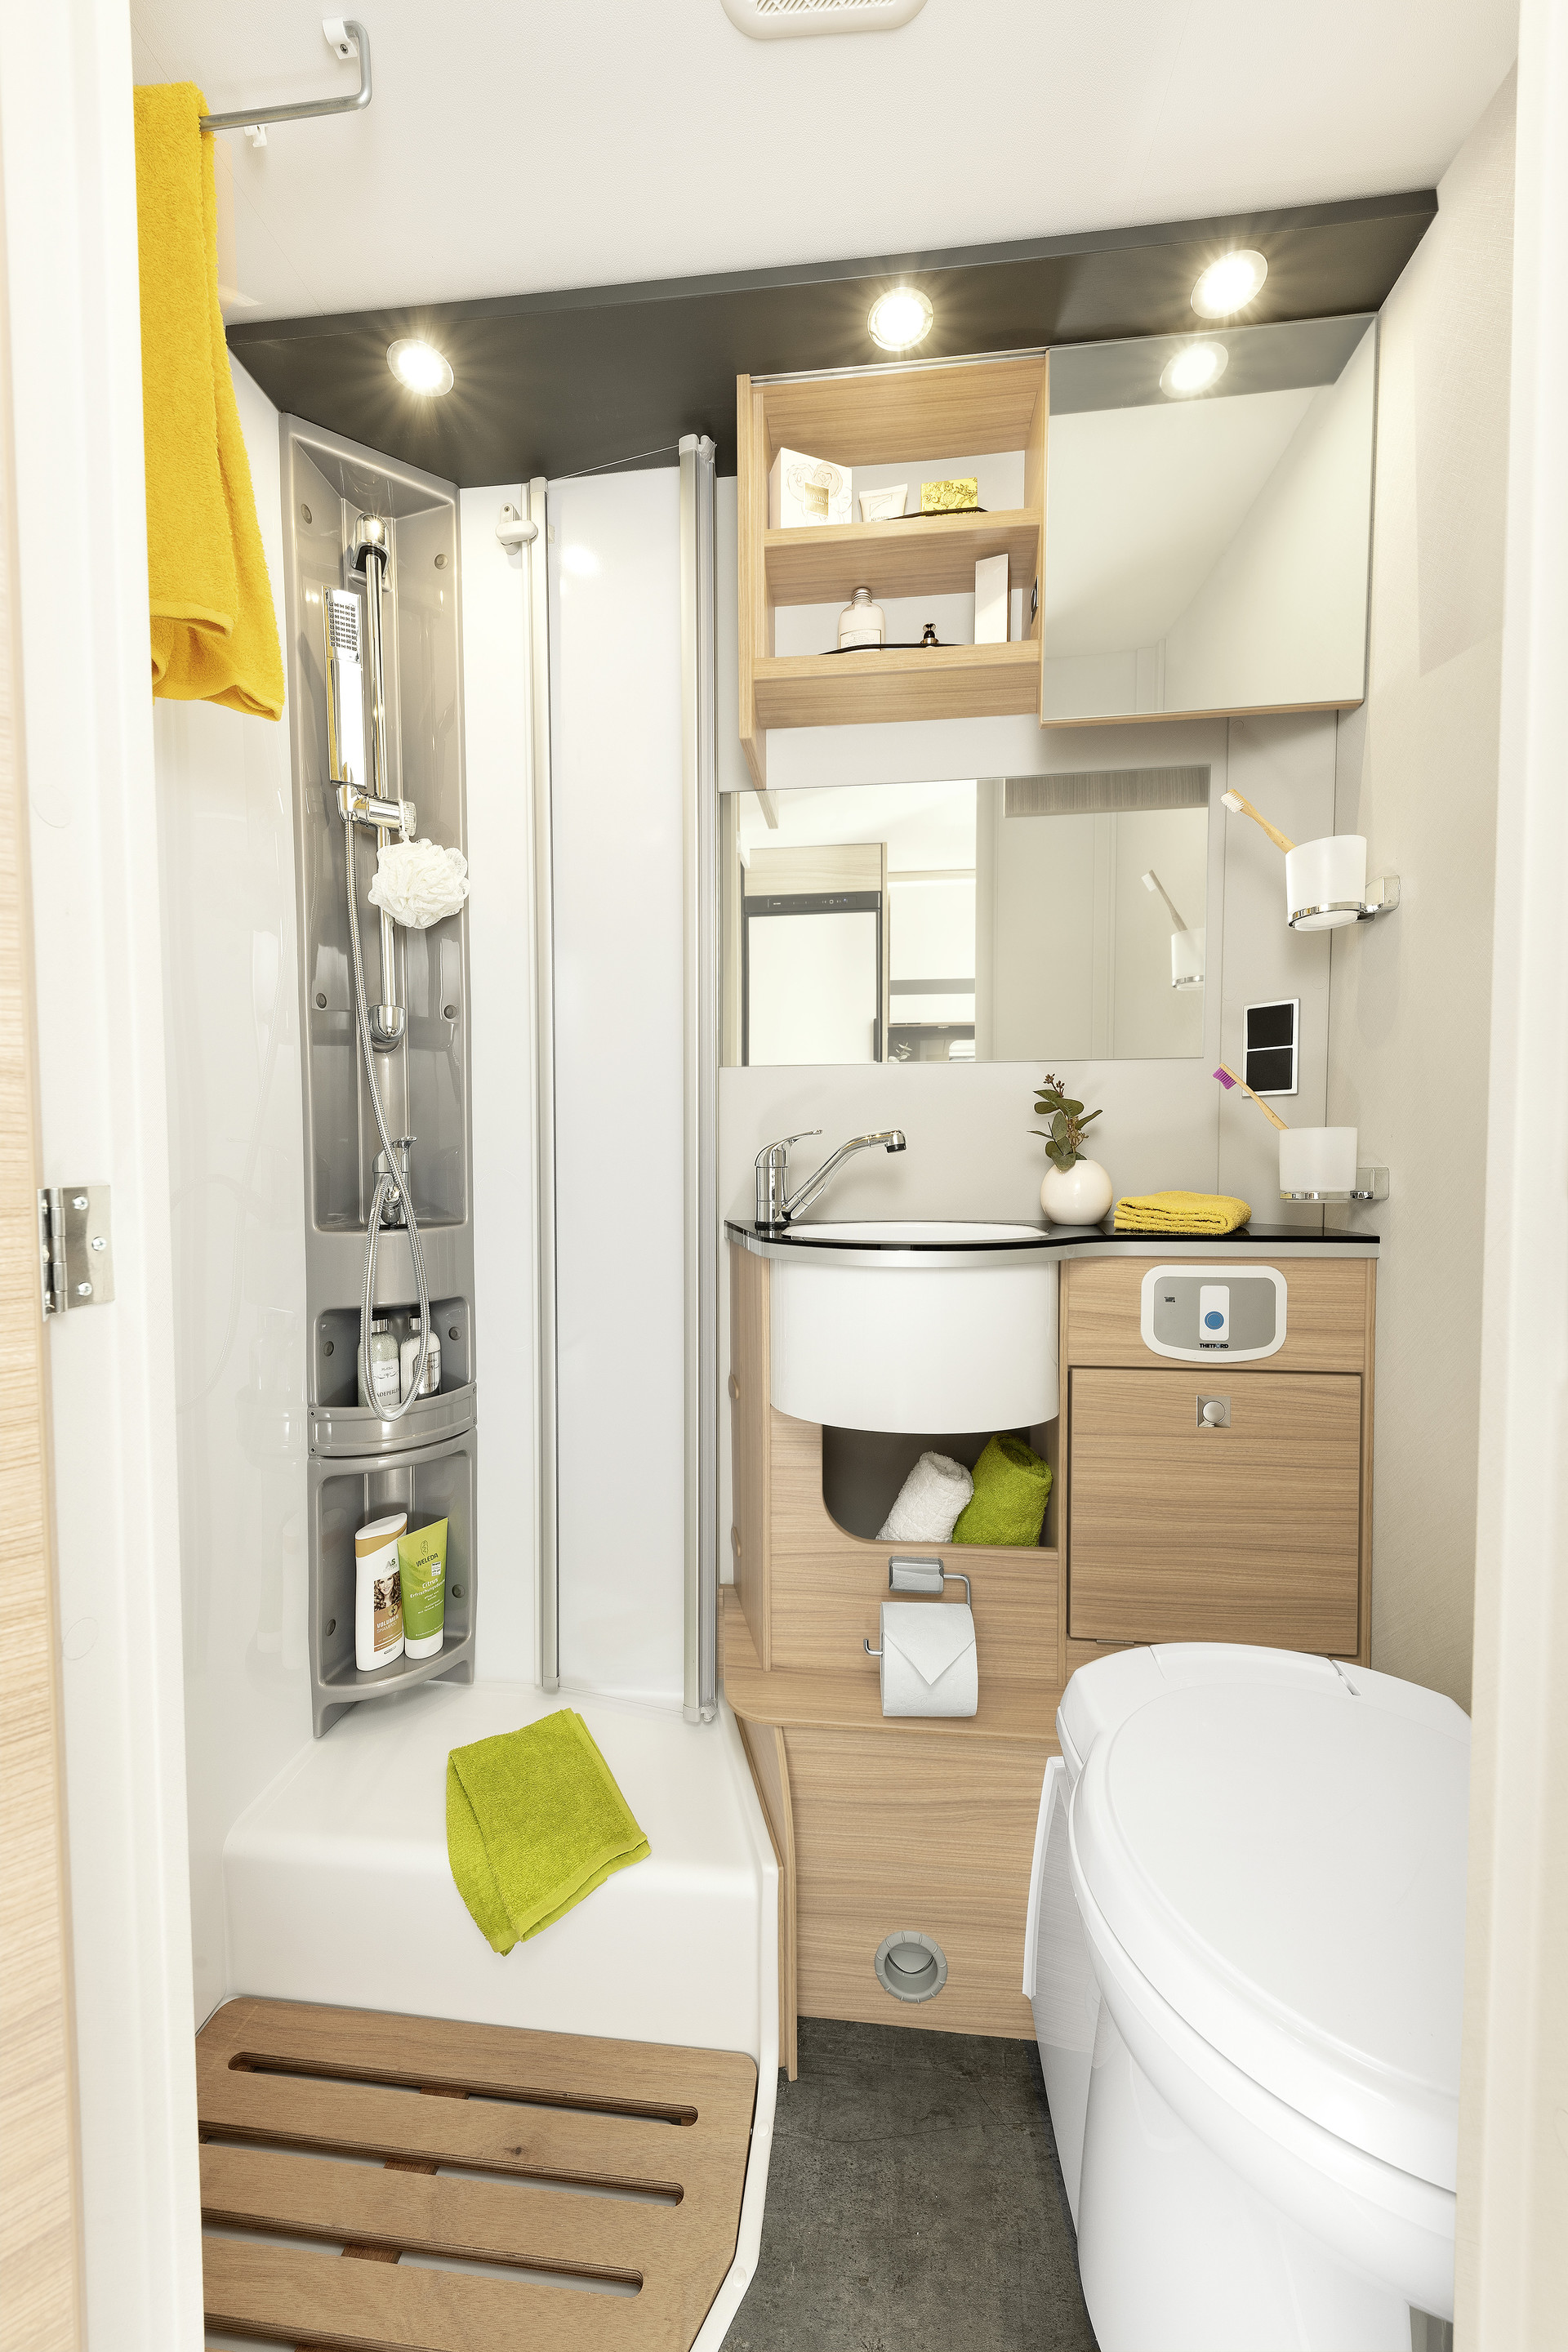 The I 6 comes with a roomy, separate shower, an easy-to-access sink and lots of storage space • I 6